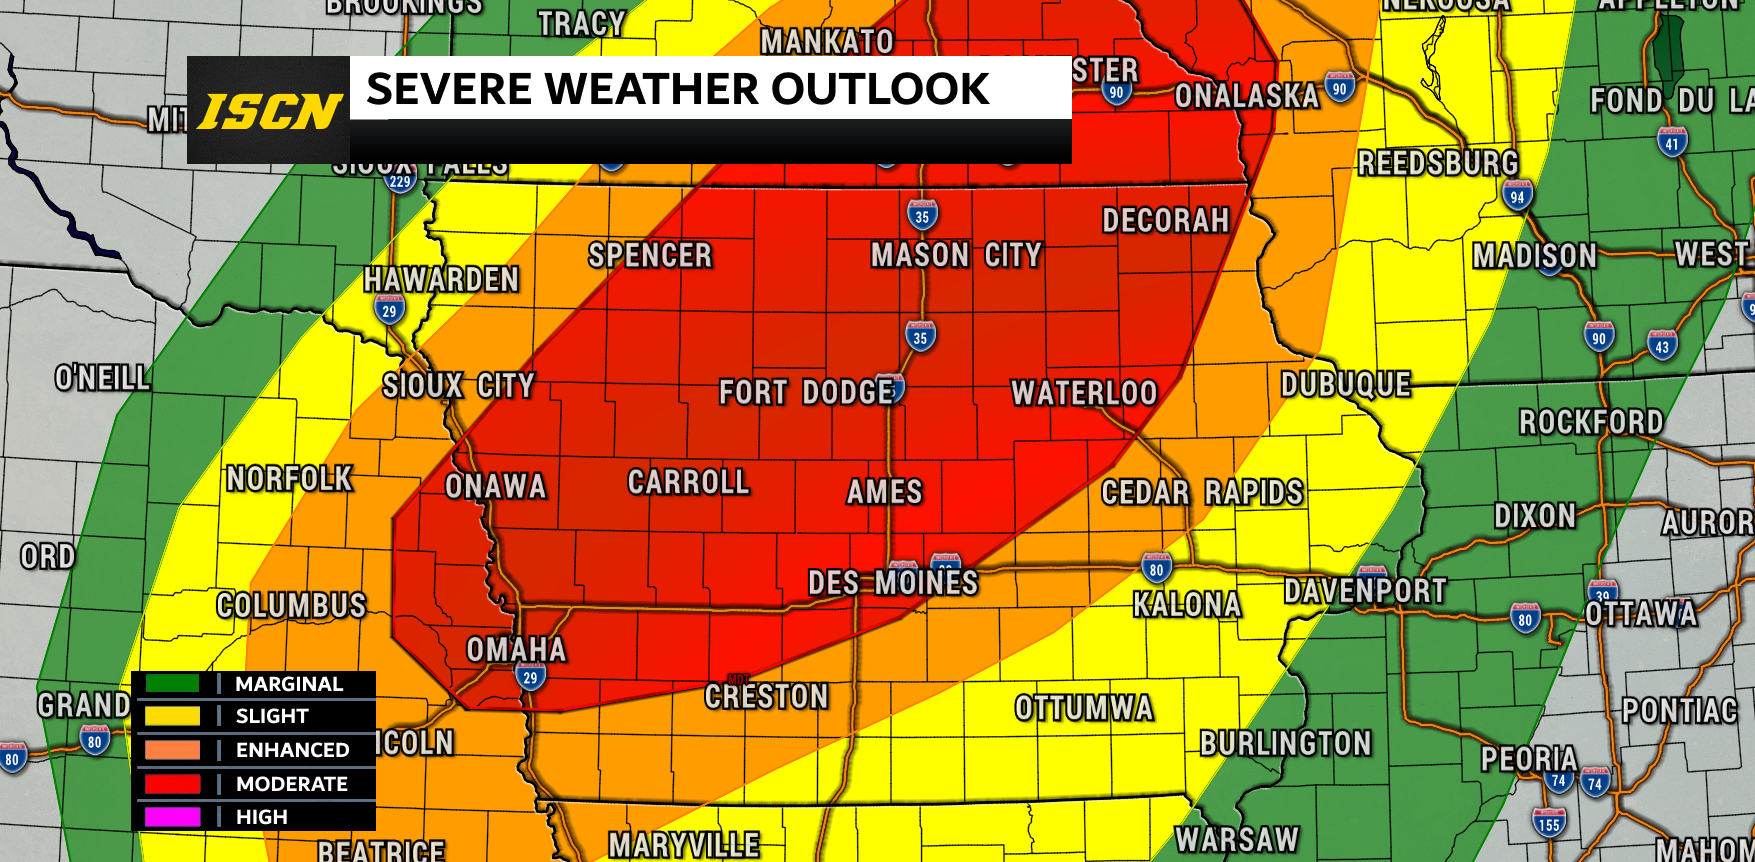 Rare December Moderate Severe Weather Risk Issued for Iowa